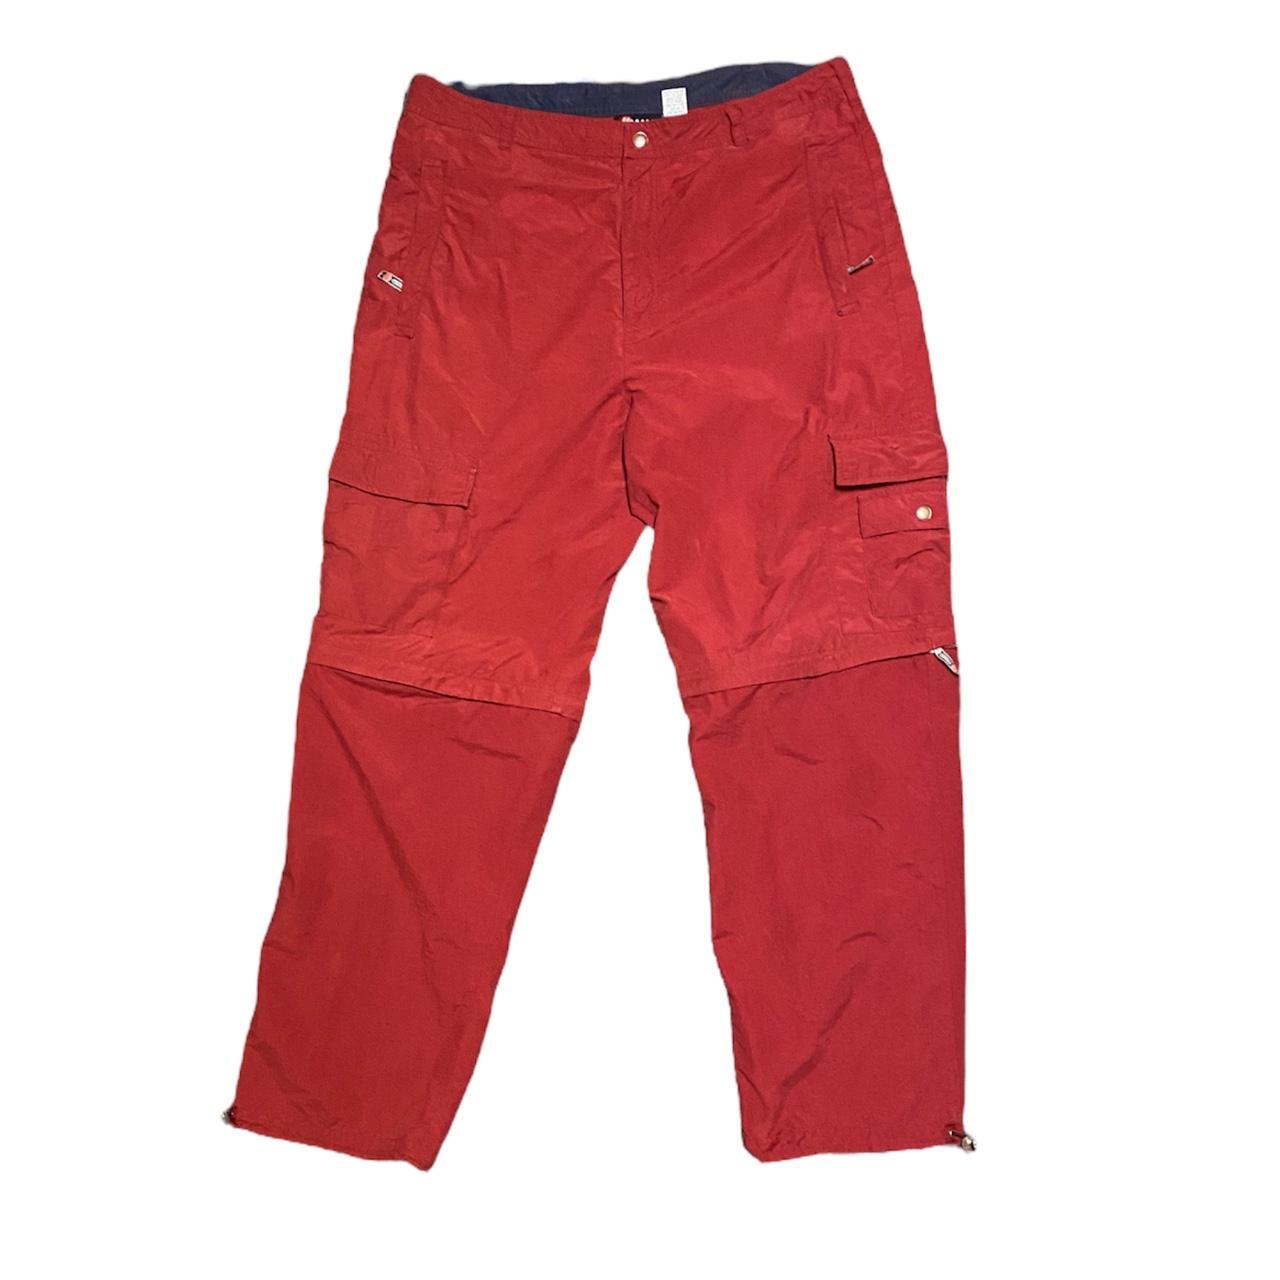 Utility Men's Burgundy and Orange Trousers